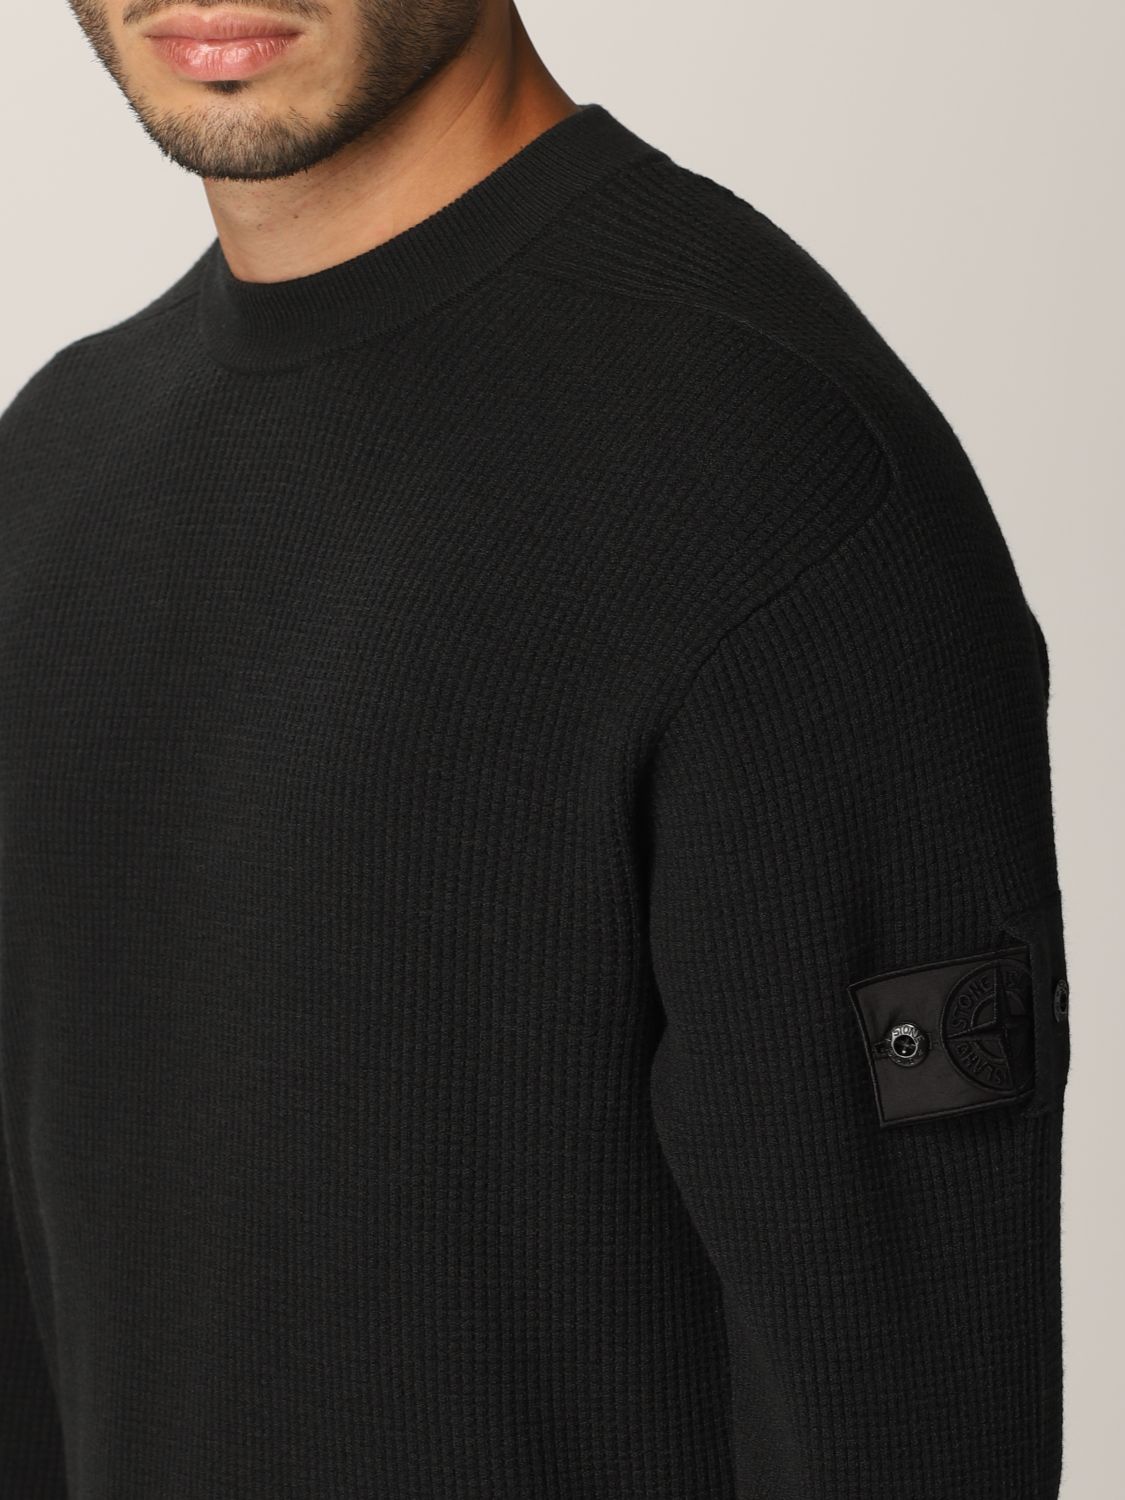 Pullover Stone Island: Pullover herren Stone Island Shadow Project charcoal 4